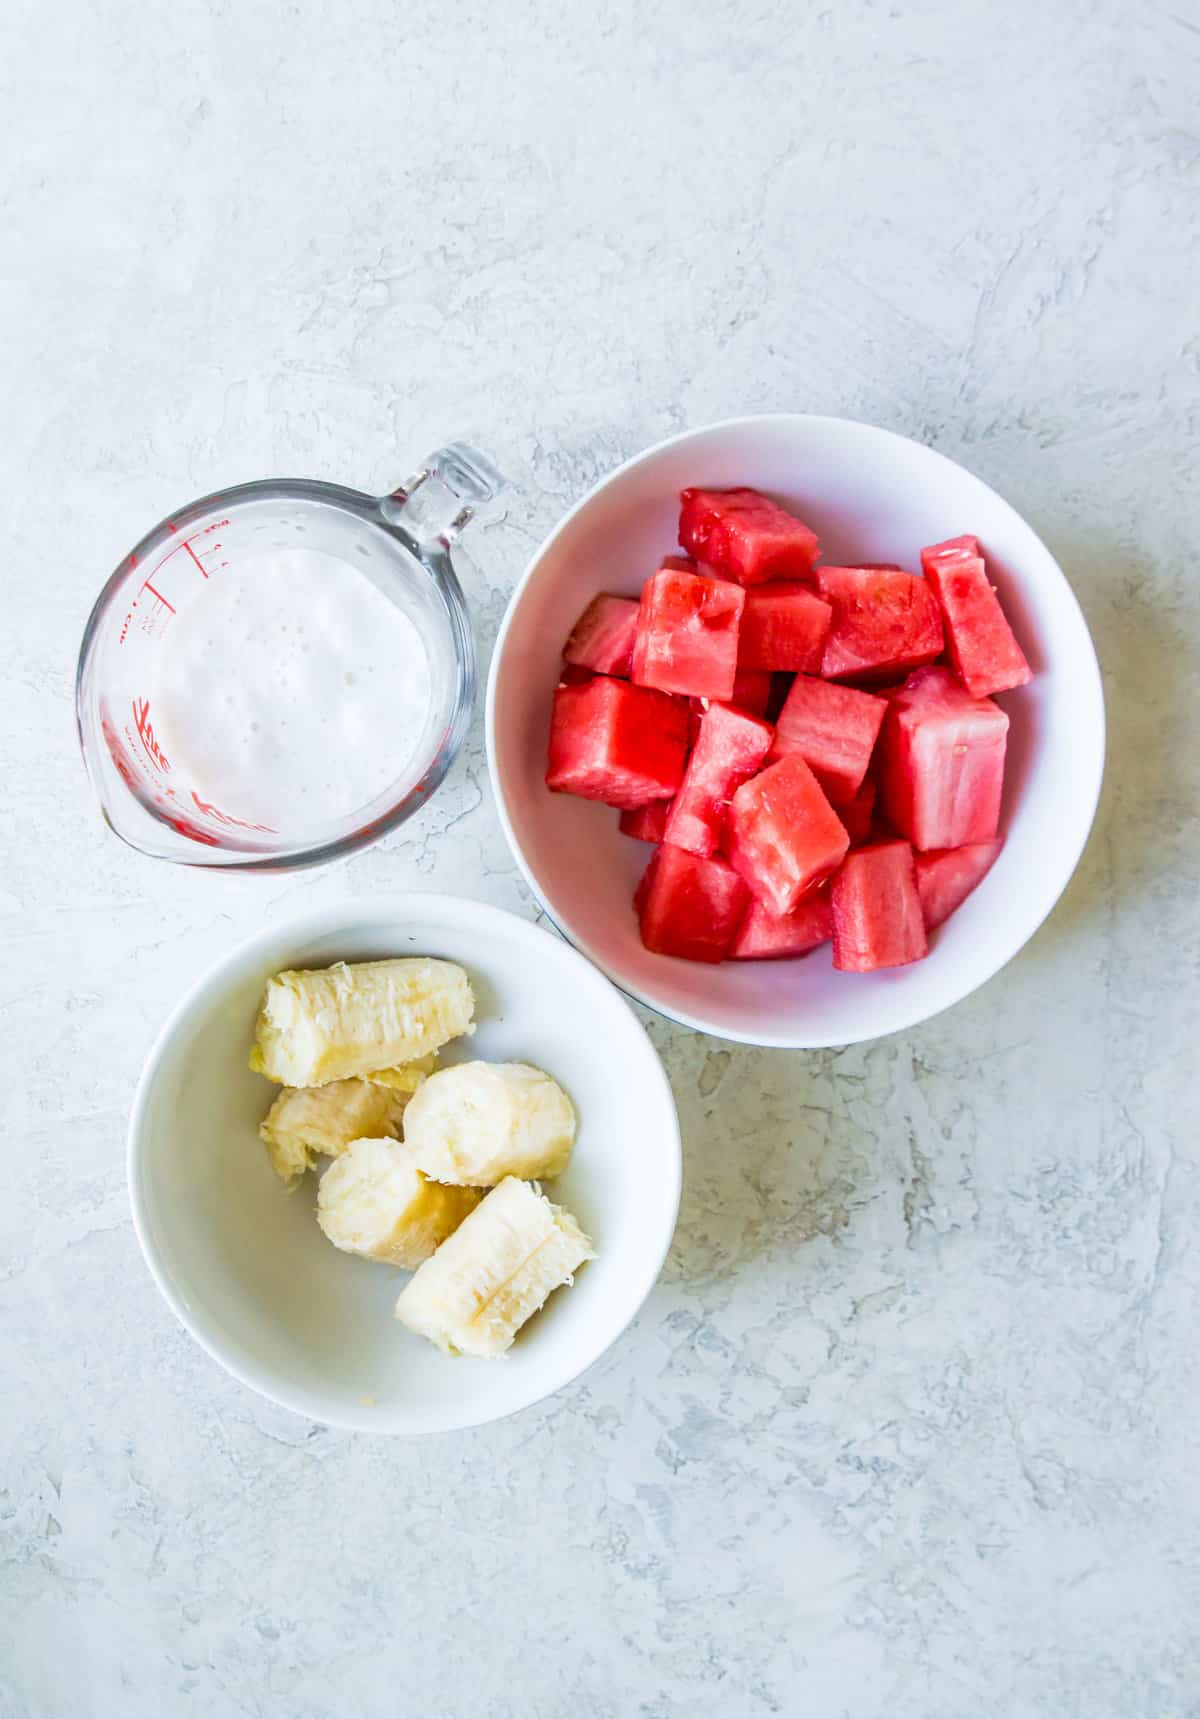 Chopped banana and watermelon in white bowls and milk in a measuring cup.